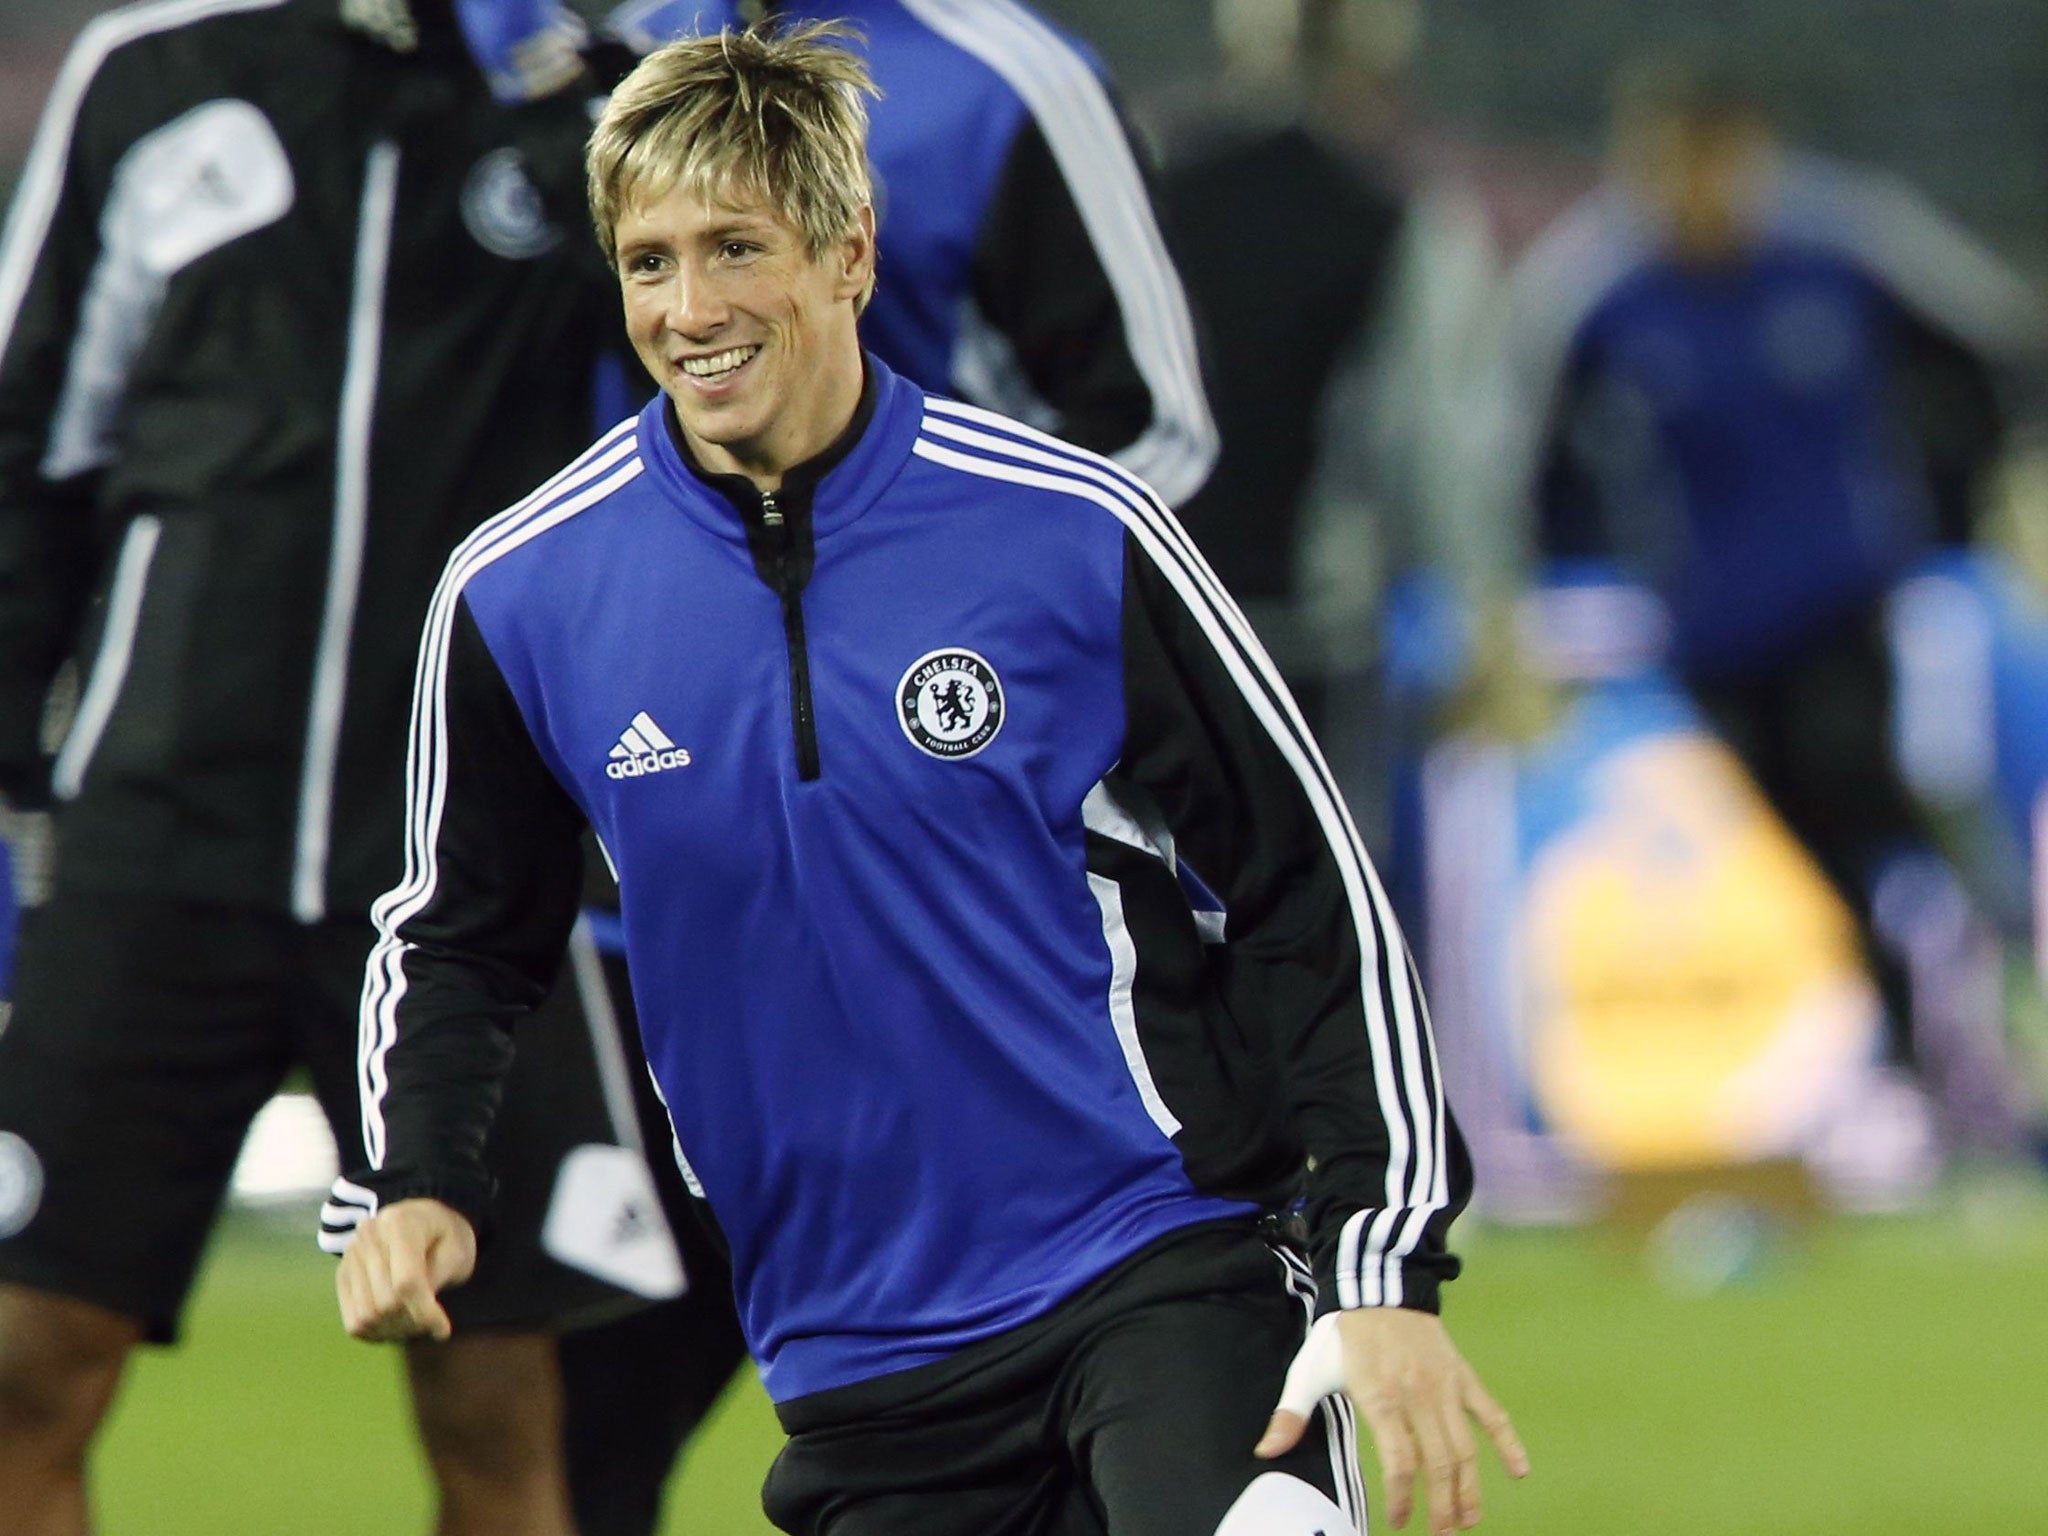 One up front: Lack of other strikers has kept Fernando Torres playing